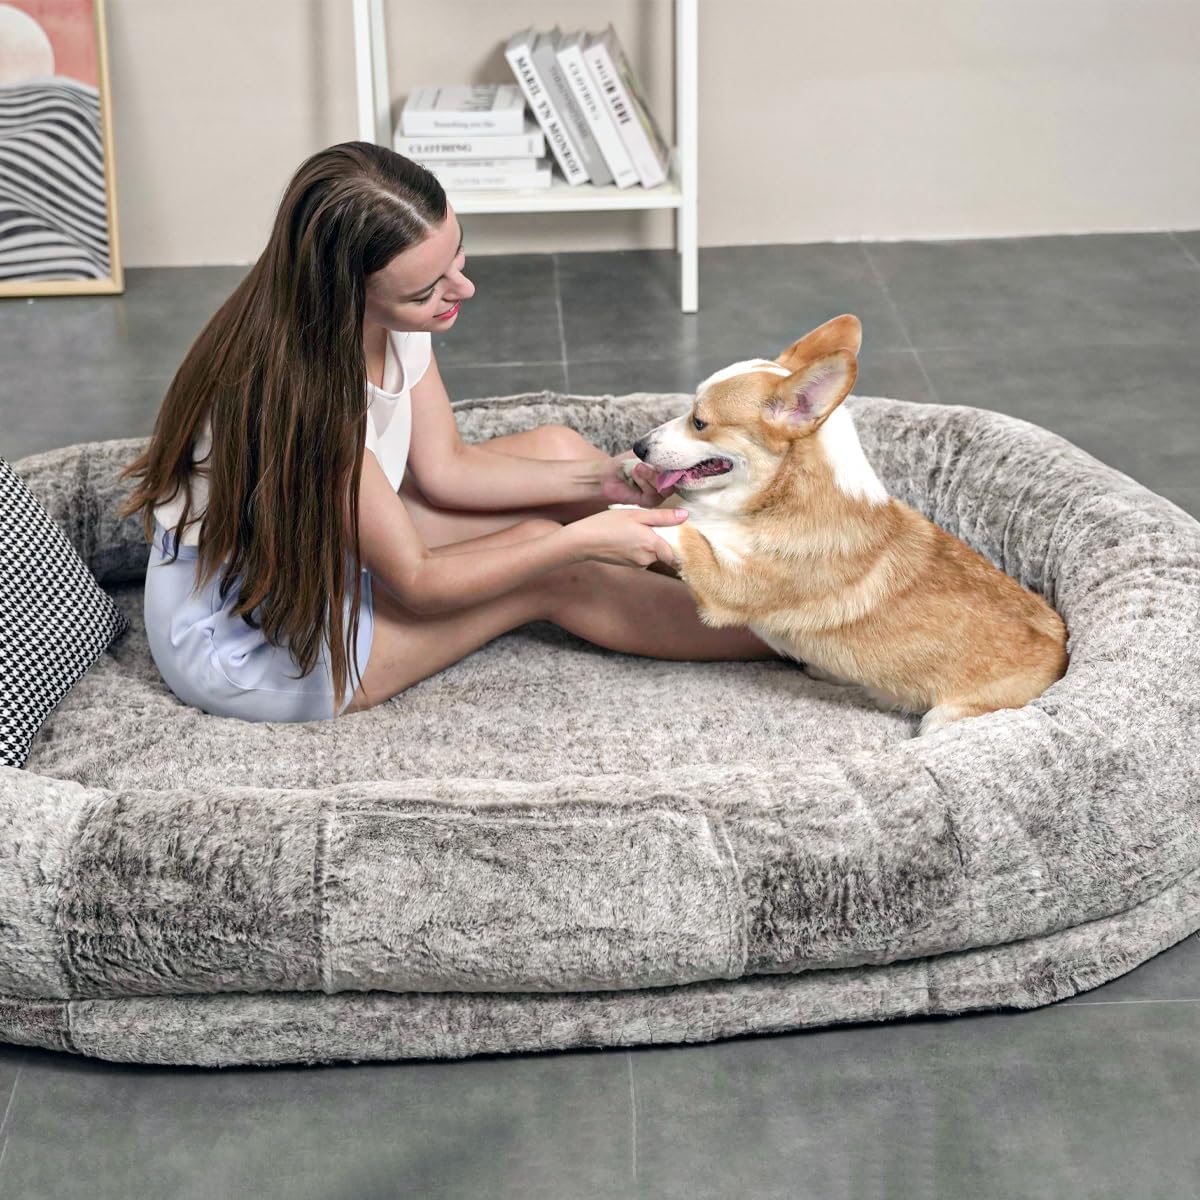 Etstod Human Dog Bed for People Adults, Large Elliptical Bean Bag Bed (72x48x10) with Washable Fuax Fur and Orthopedic Mattress for Adults Kids and Pets, Gradient Brown